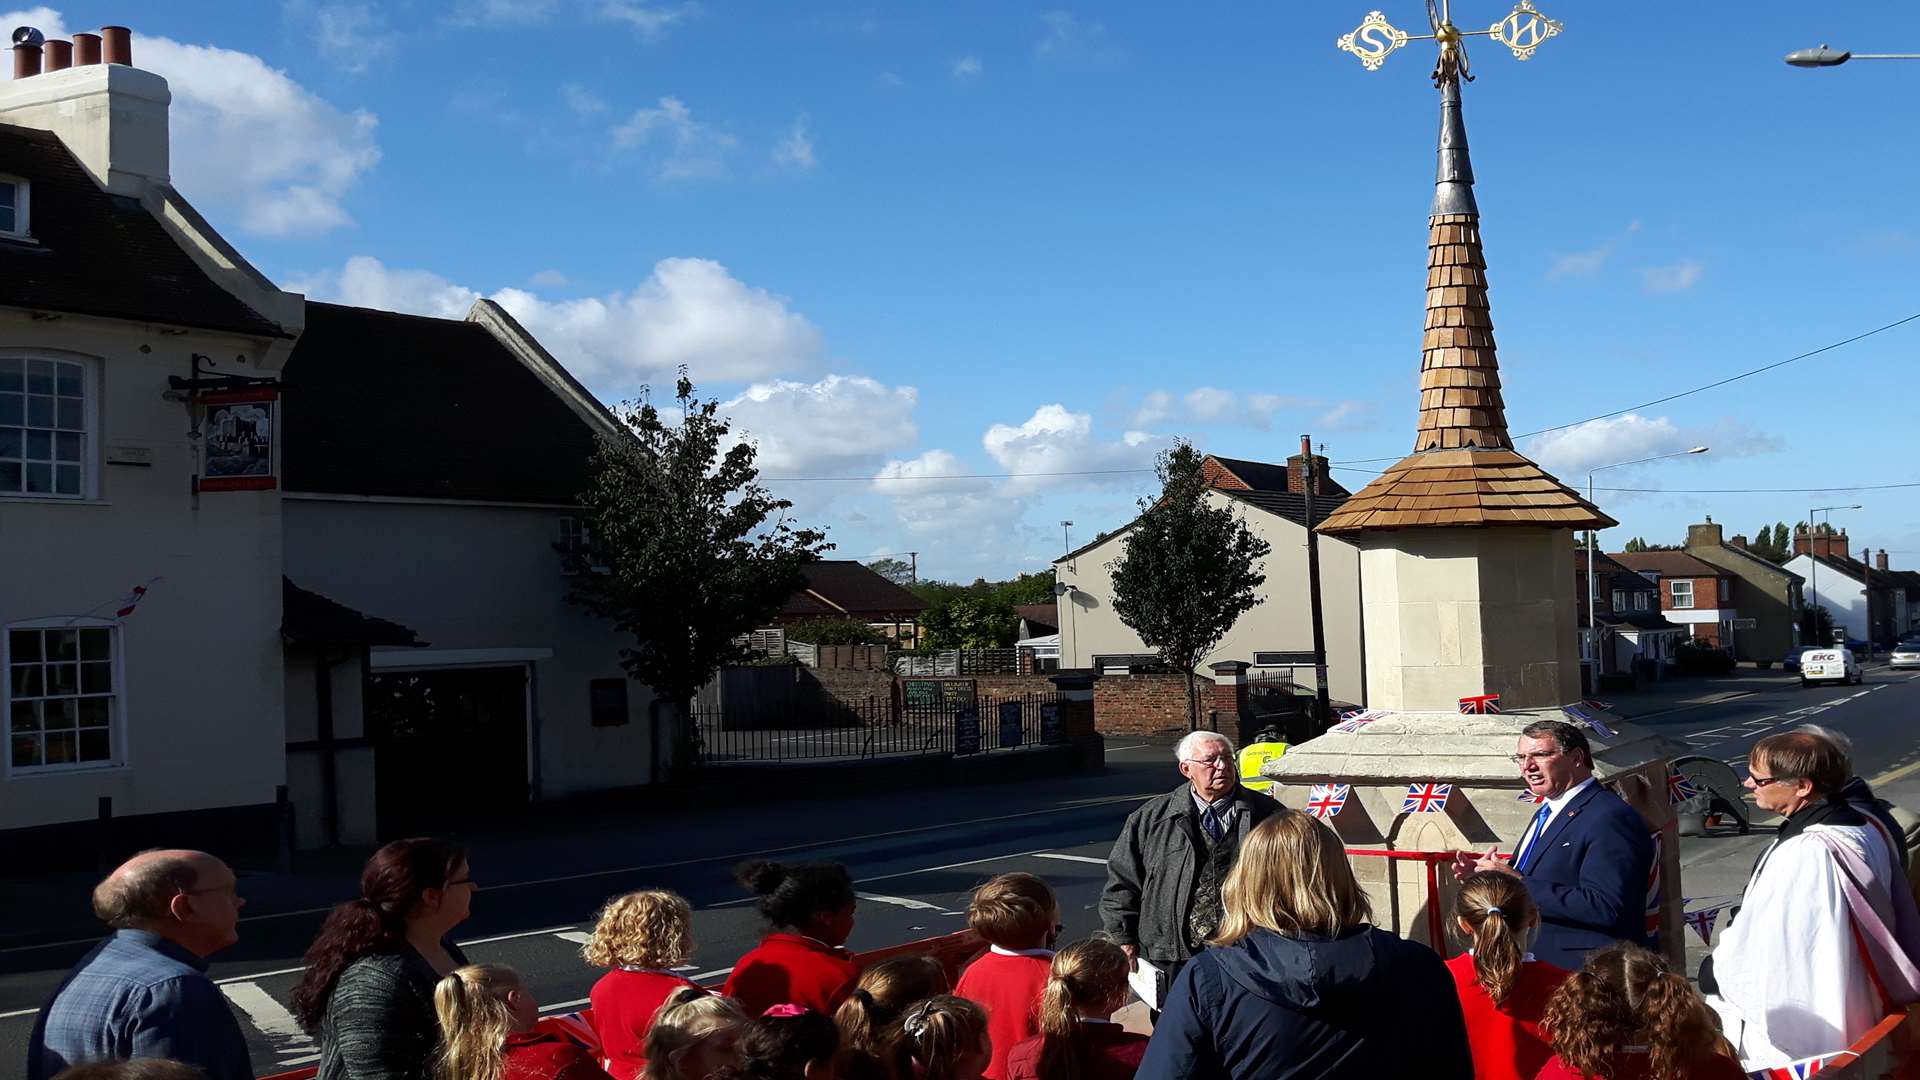 Teynham's village pump is re-dedicated in a ceremony involving a cross-section of people from the village